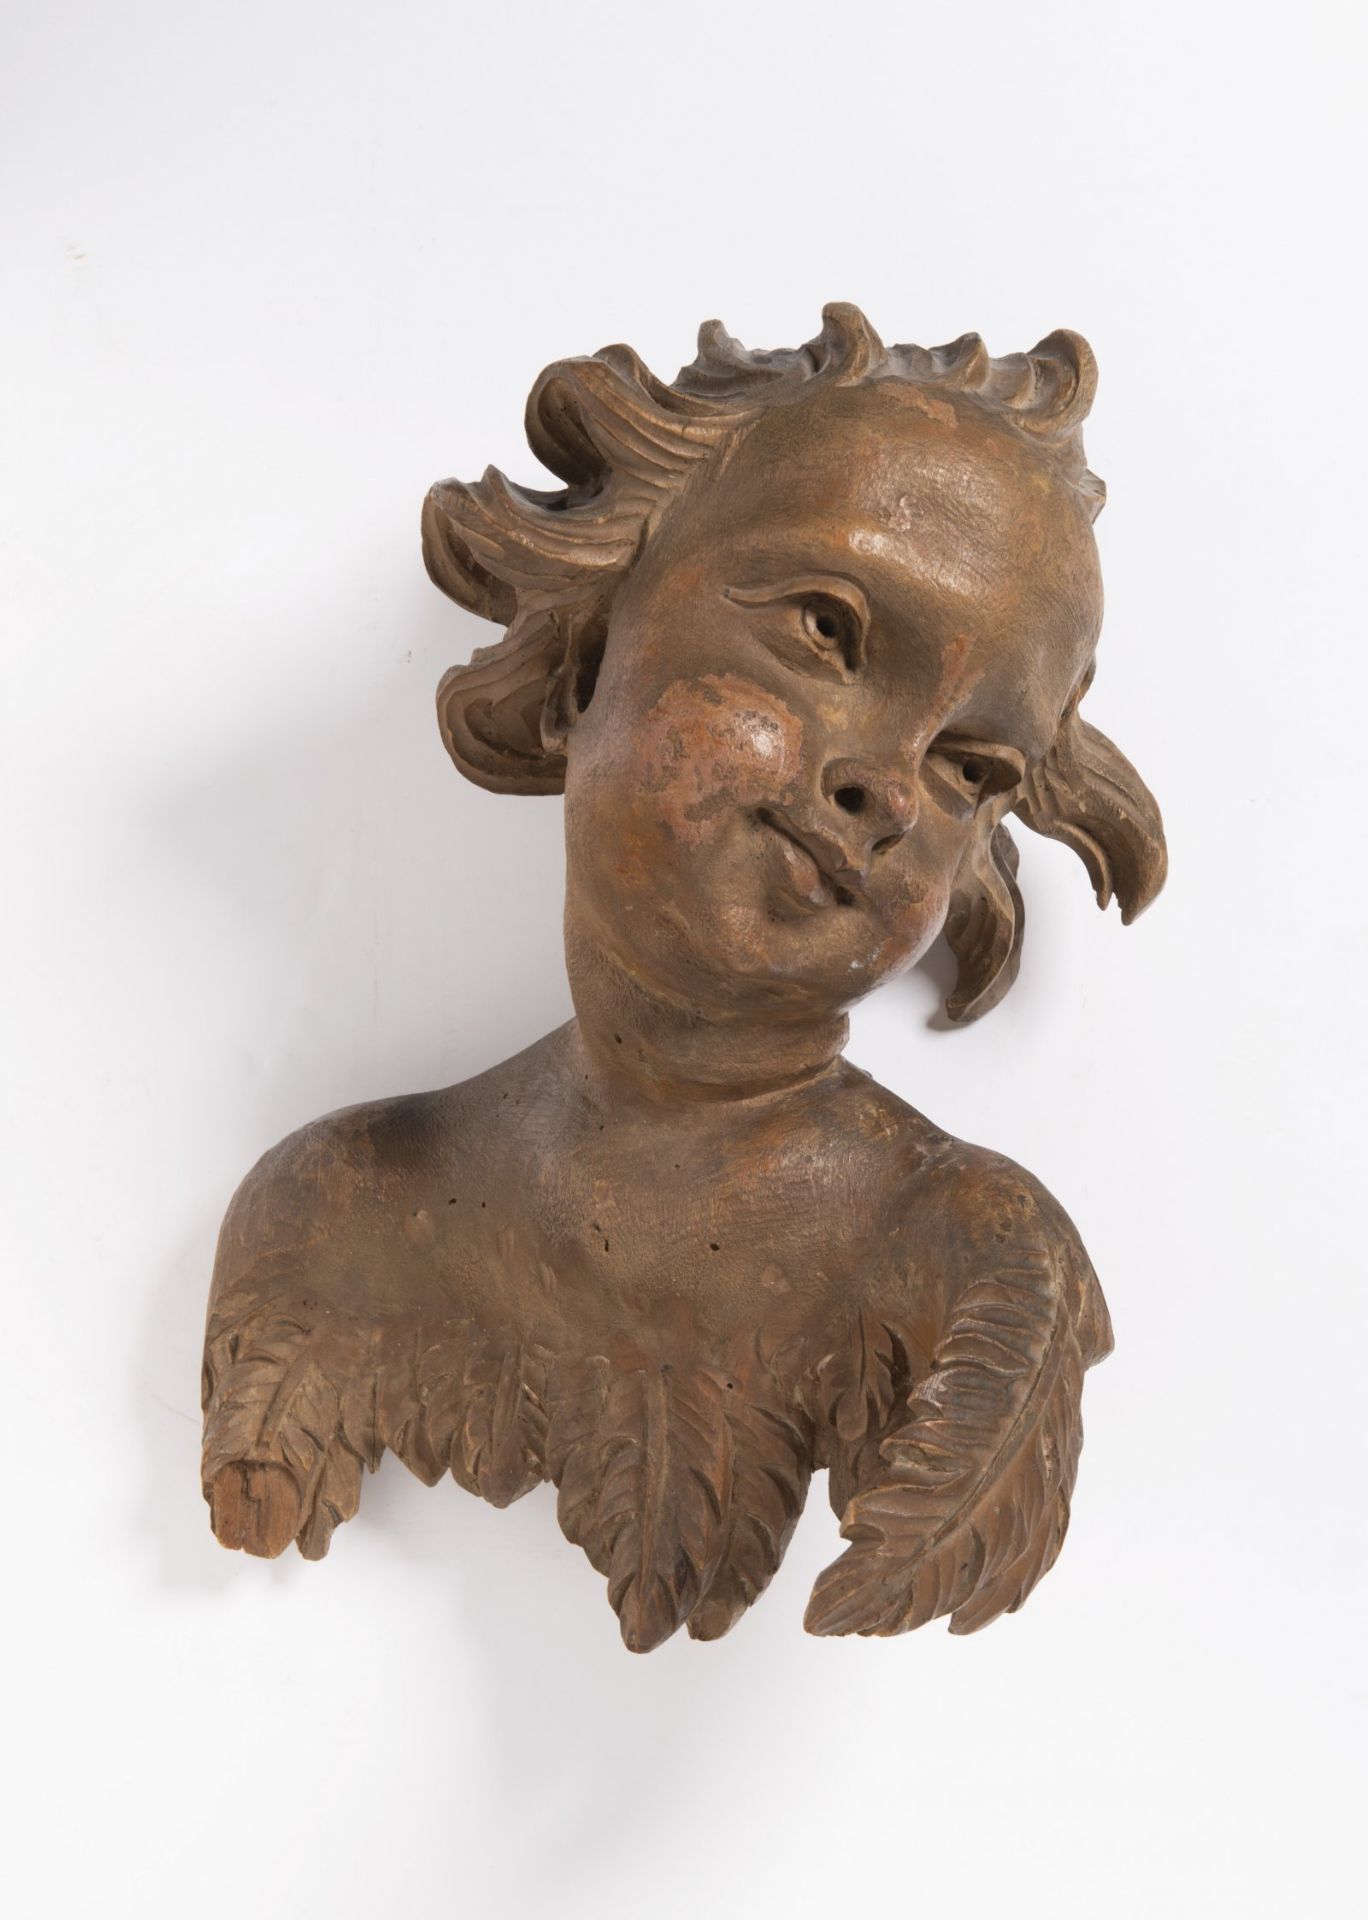 ANGEL'S HEAD 18th century Central Europe Polychrome wood 31 cm Sculpture of an angelface with a hint